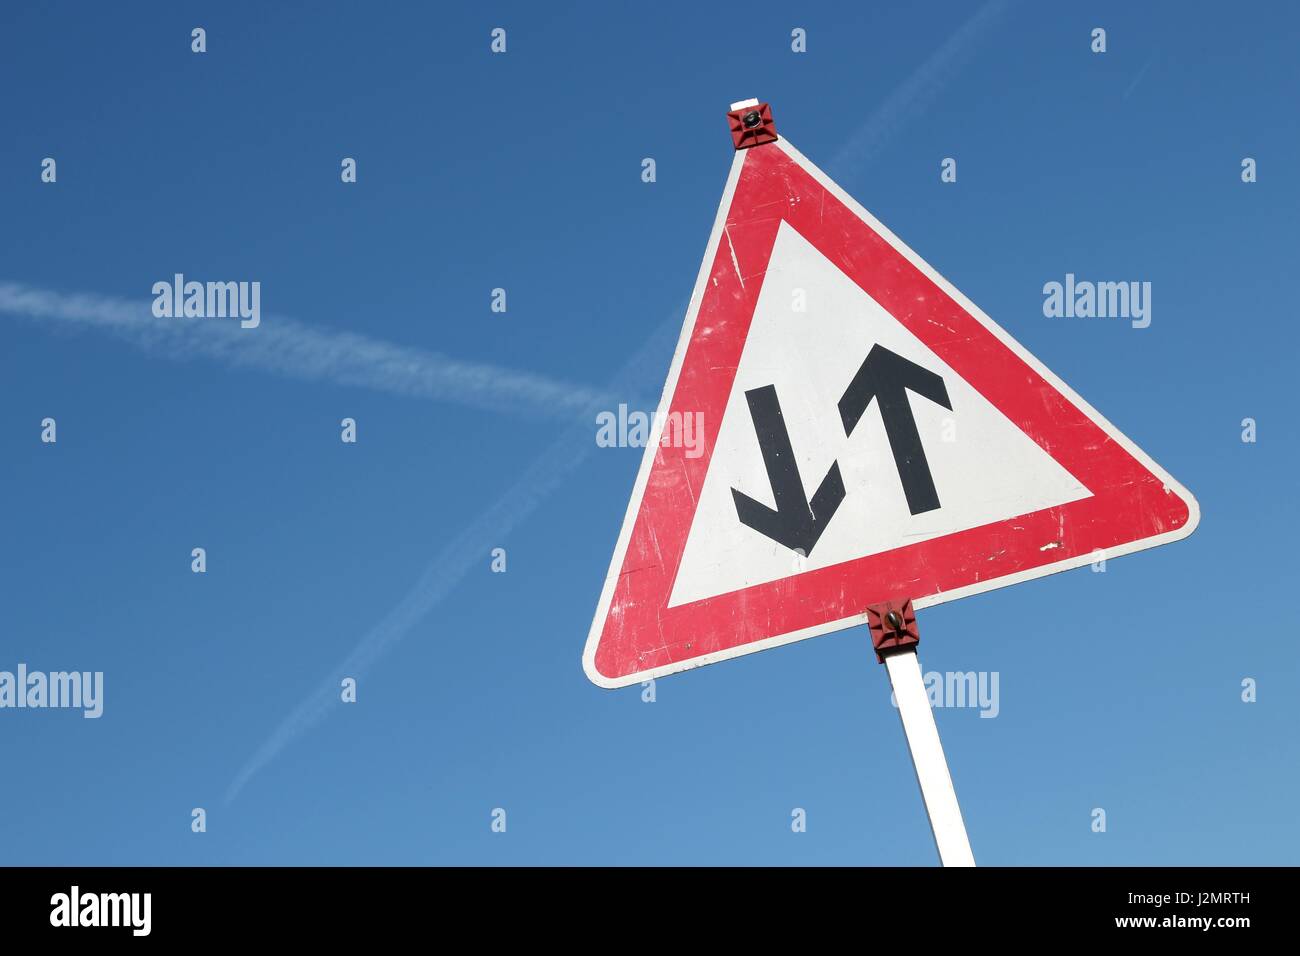 German road sign: two way traffic ahead Stock Photo